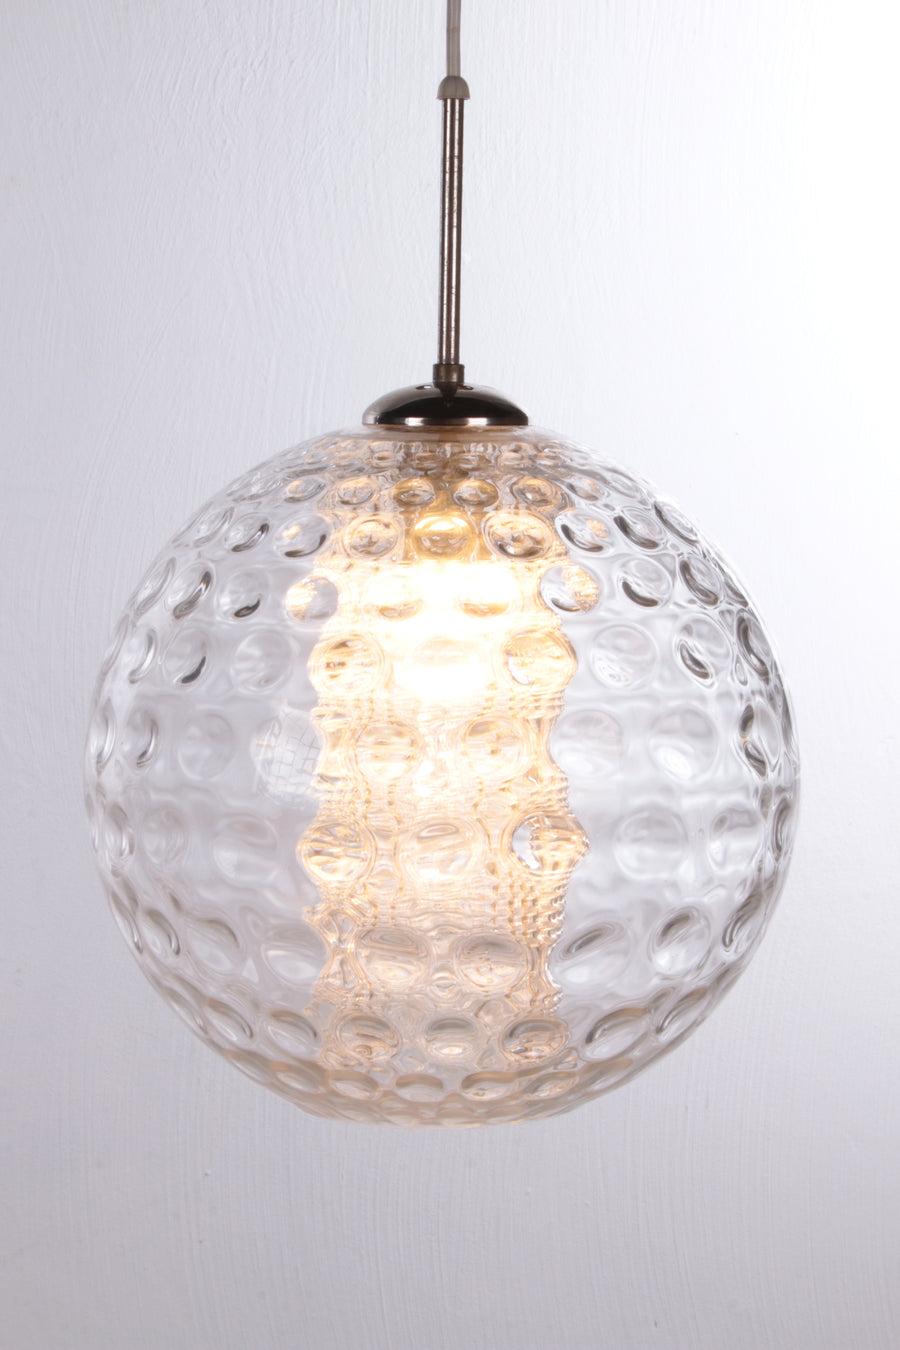 Vintage Ice Glass Ball Pendant Lamp by Doria Leuchten, 1960s

This is a beautiful crystal ball.

Made of glass, the outside is made of bubble glass and the cylinder inside is made of ice glass.

The cylinder contains a lamp with an E27 fitting. A